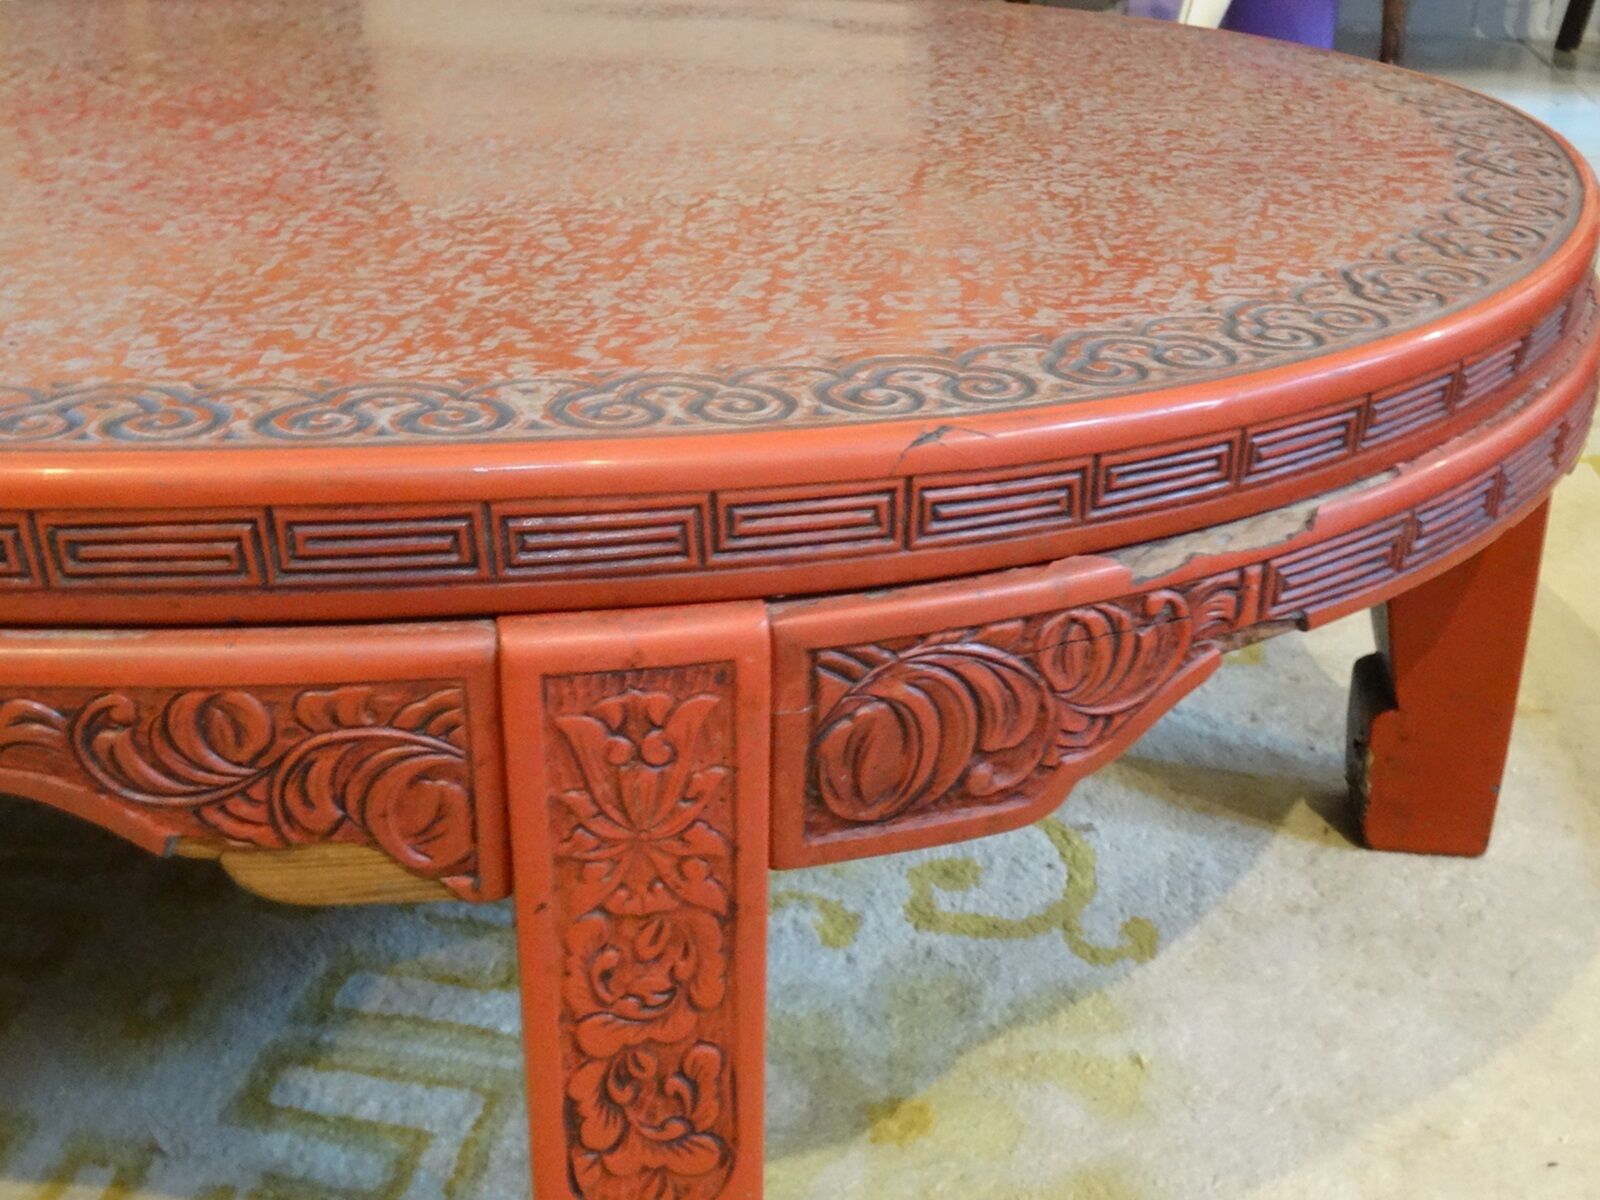 ANTIQUE LATE 19 c. CHINESE LACQUER INTRICATE CARVED CINNABAR COFFEE TABLE Без бренда - фотография #5